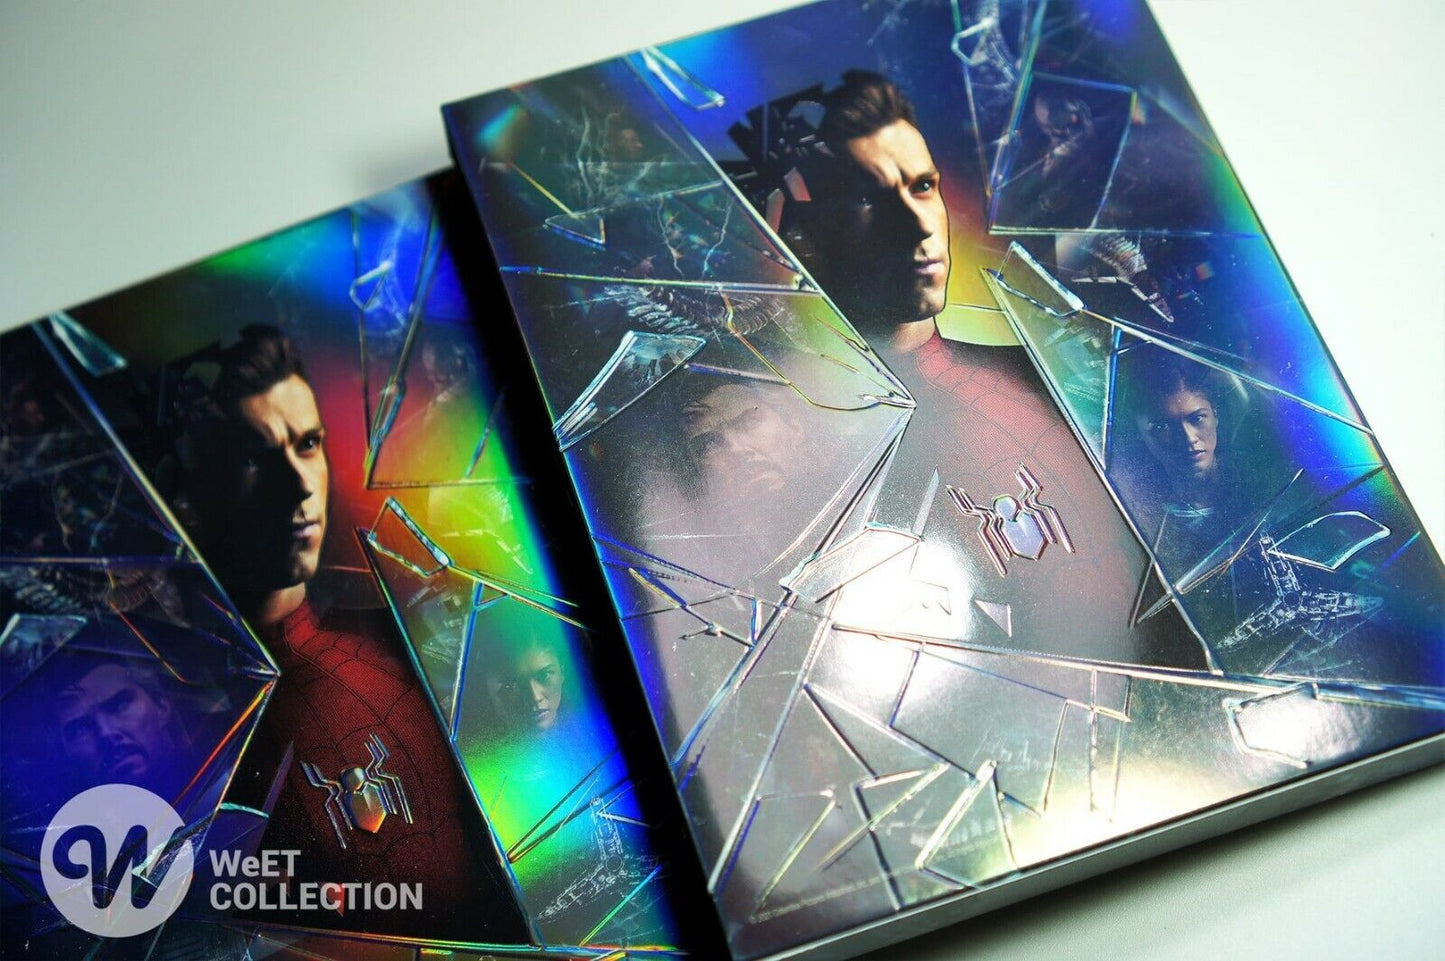 Spider-Man: No Way Home 4K Blu-ray Steelbook WeET Collection Collection #24 One Click Set